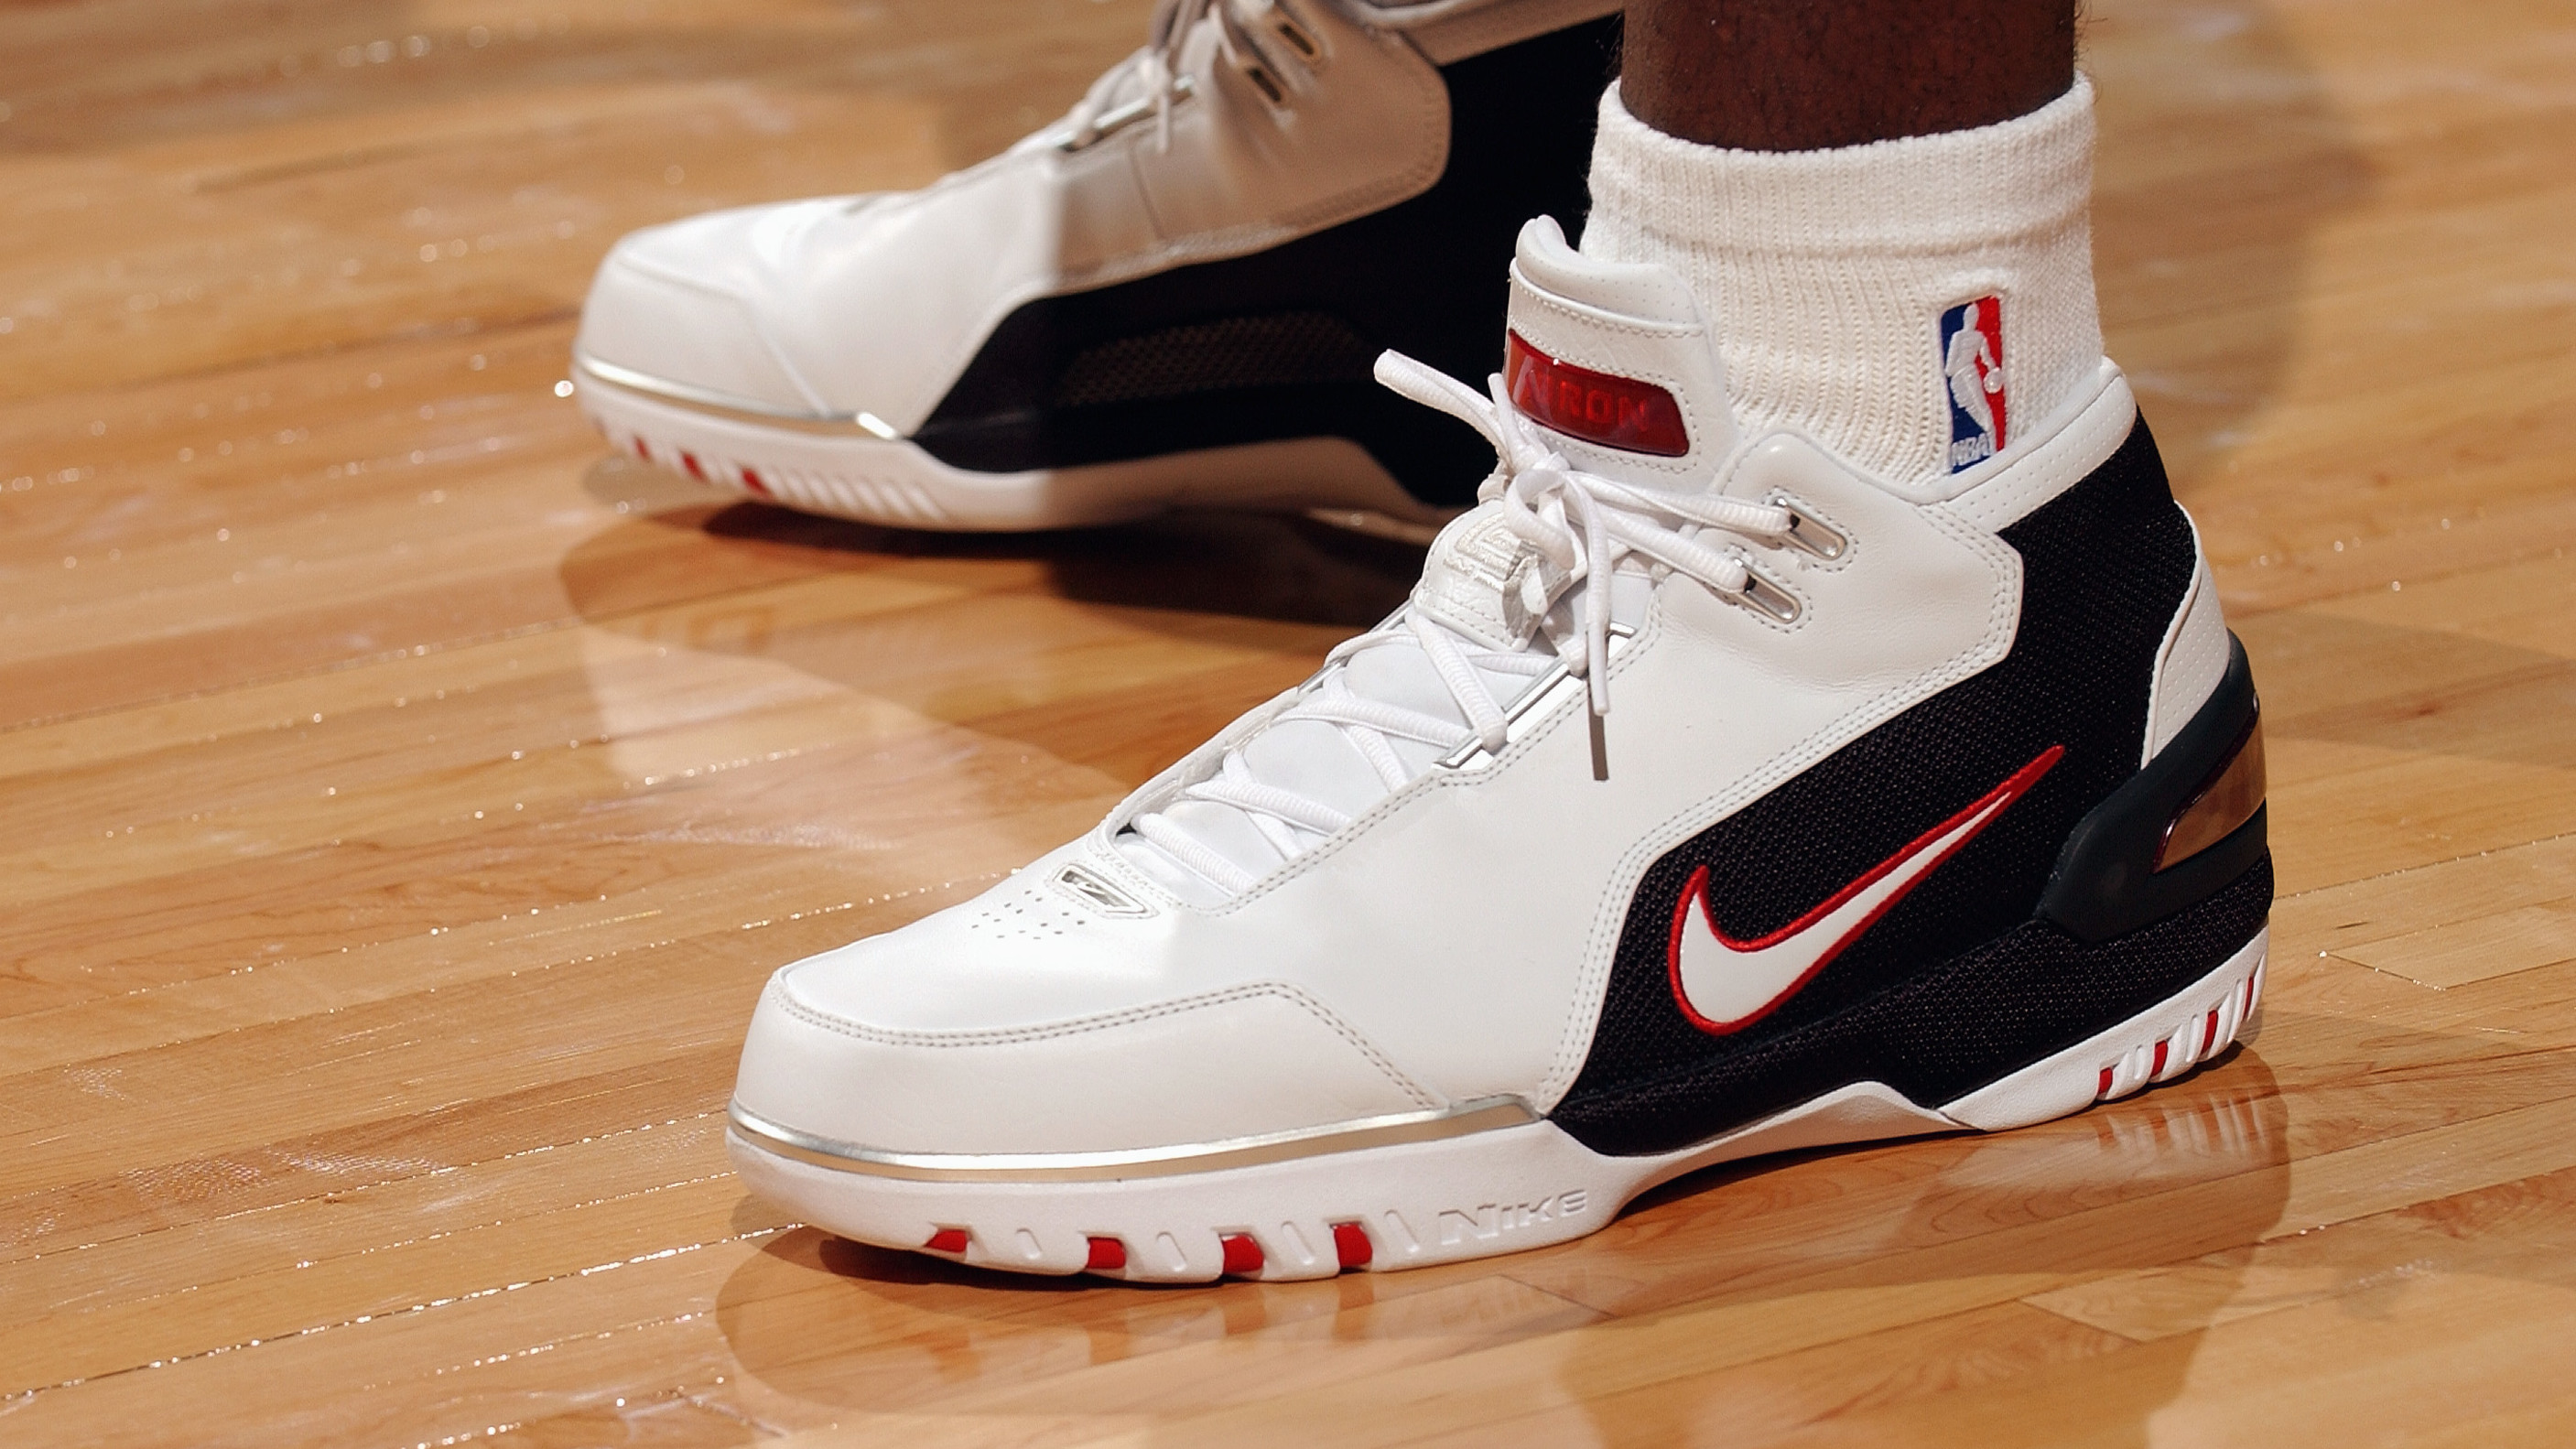 LeBron James' Debut Sneakers Are Returning This Year